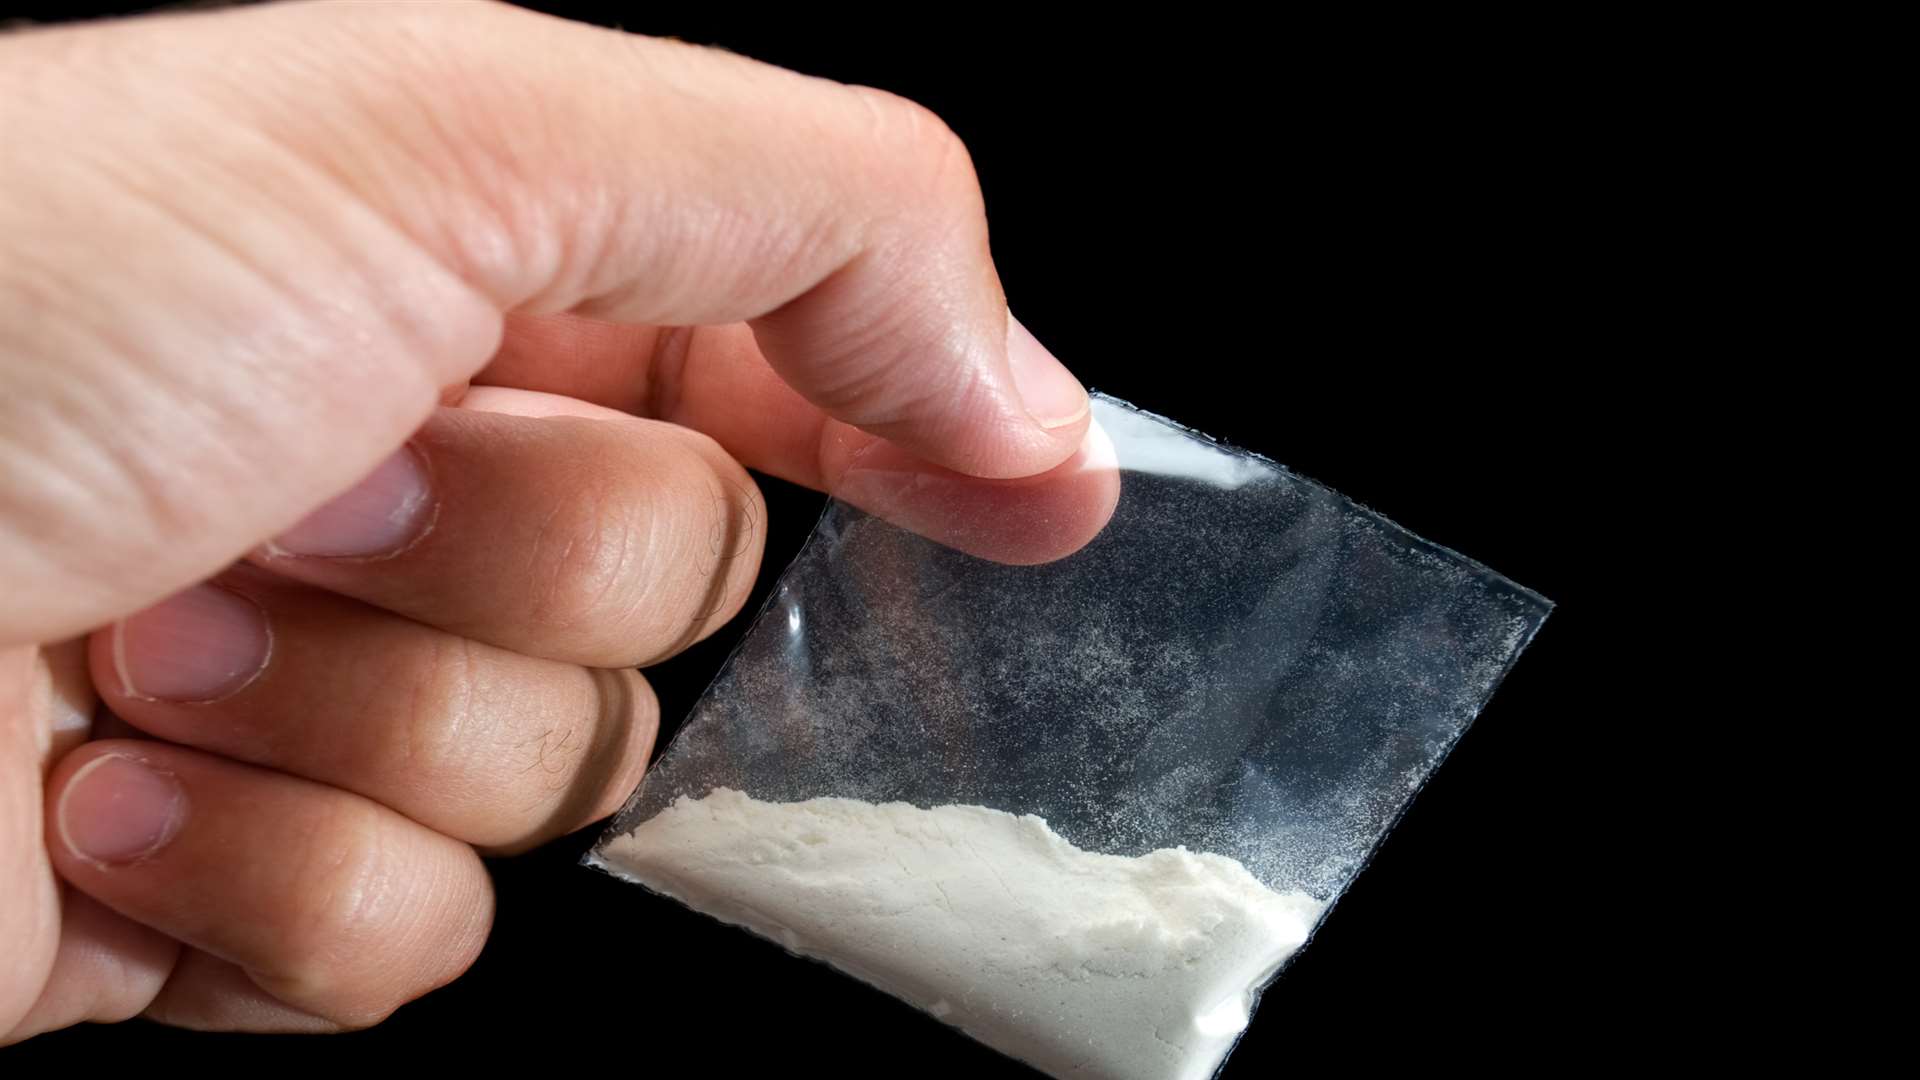 Bag of heroin, stock picture. Thinkstock Image Library